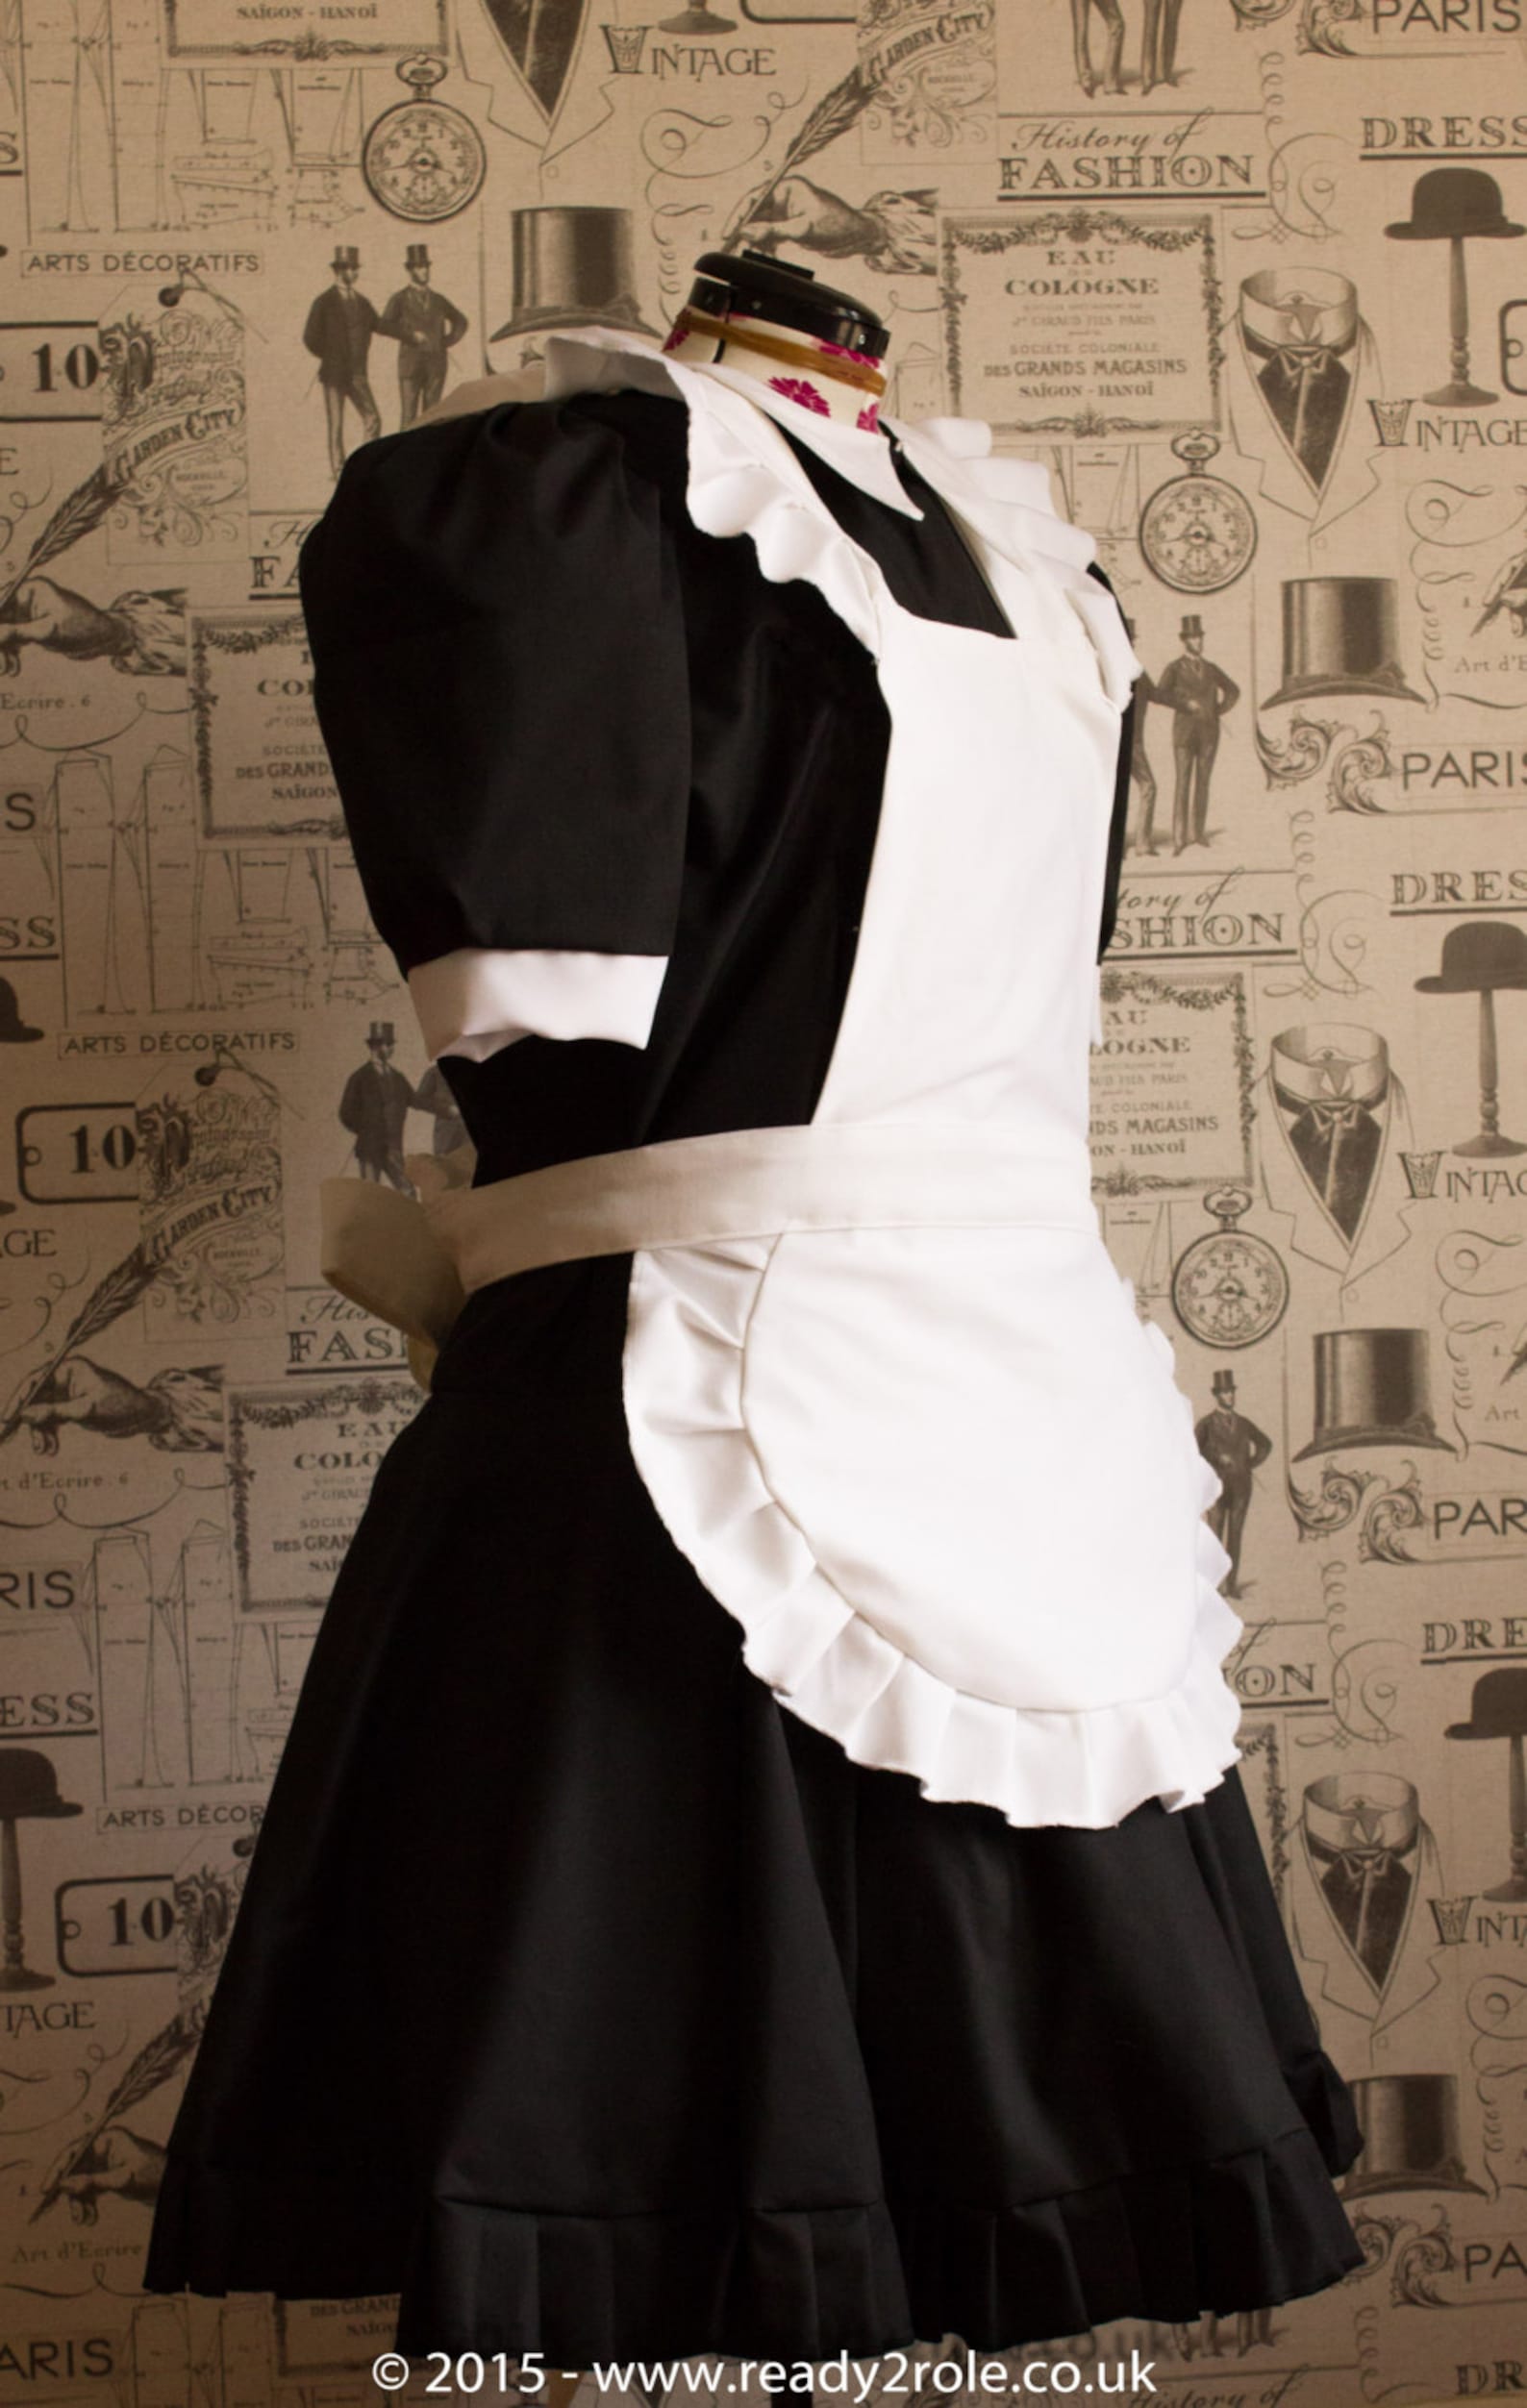 The FPJ Full Service Cotton Sissy Maid Dress Etsy